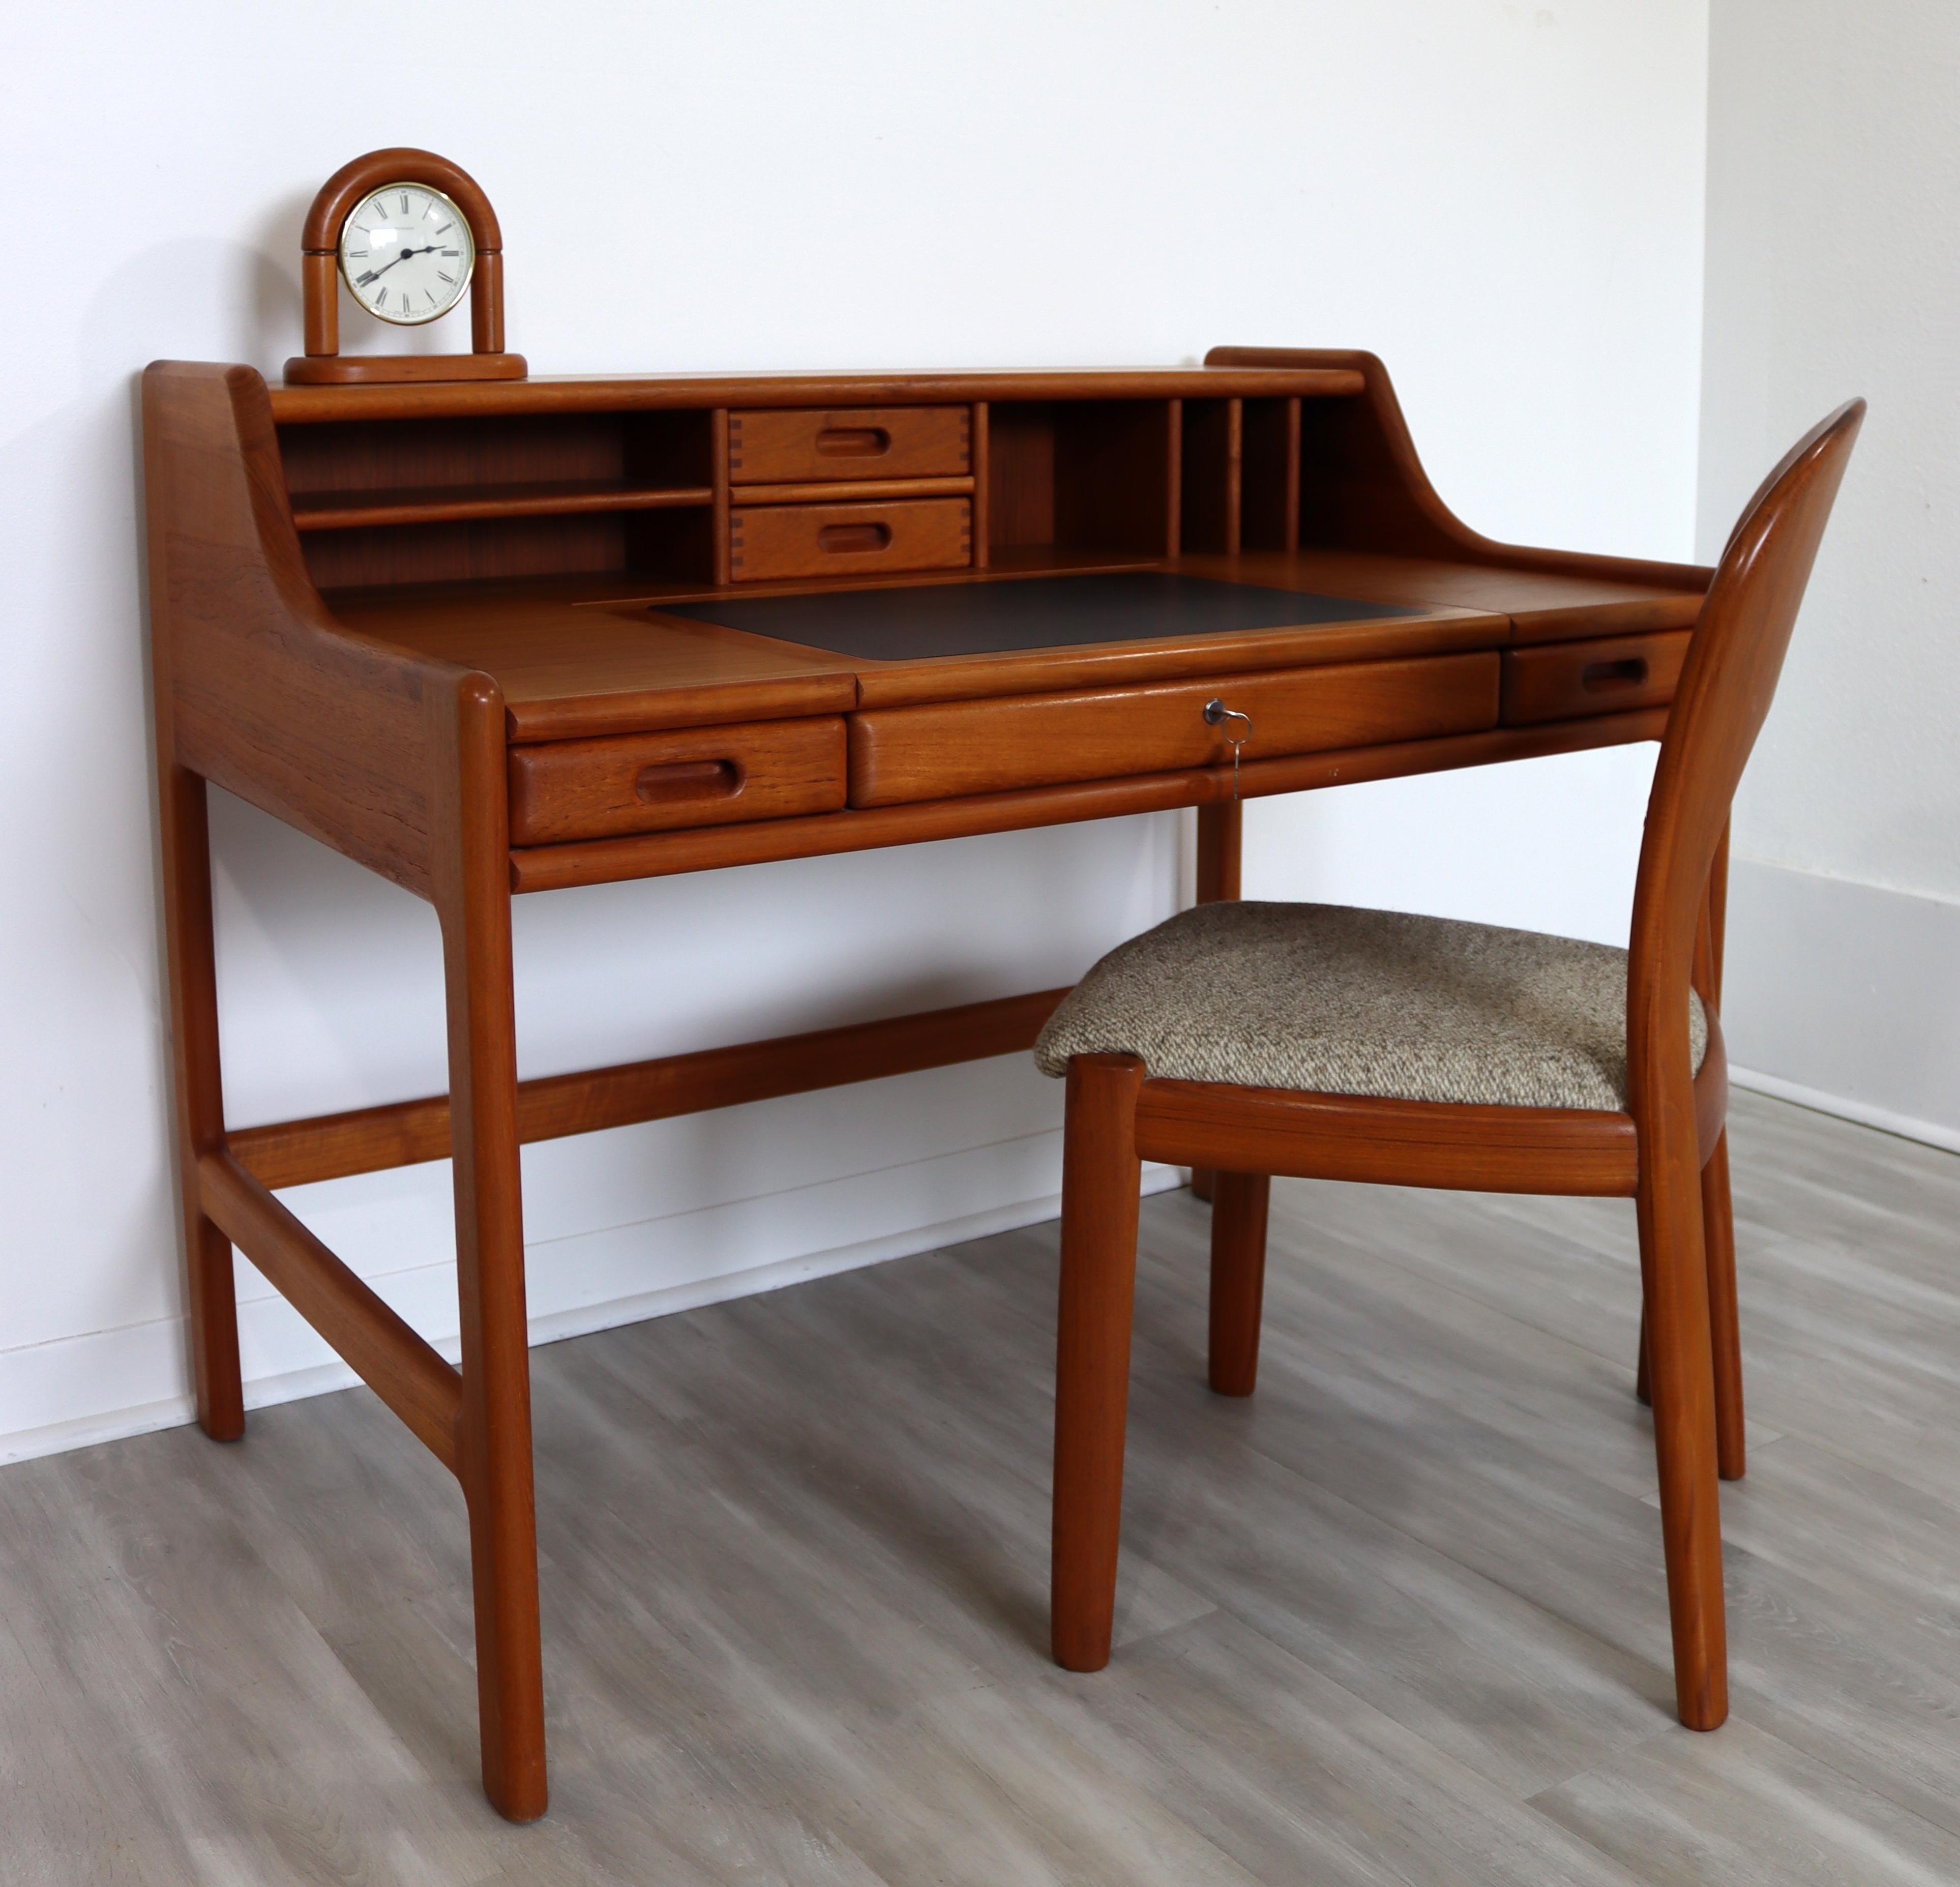 For your consideration is a fantastic solid teak desk, with matching chair and clock, by John Mortensen for Dyrlund Denmark, circa the 1970s. In excellent vintage condition. The dimensions of the desk are 43